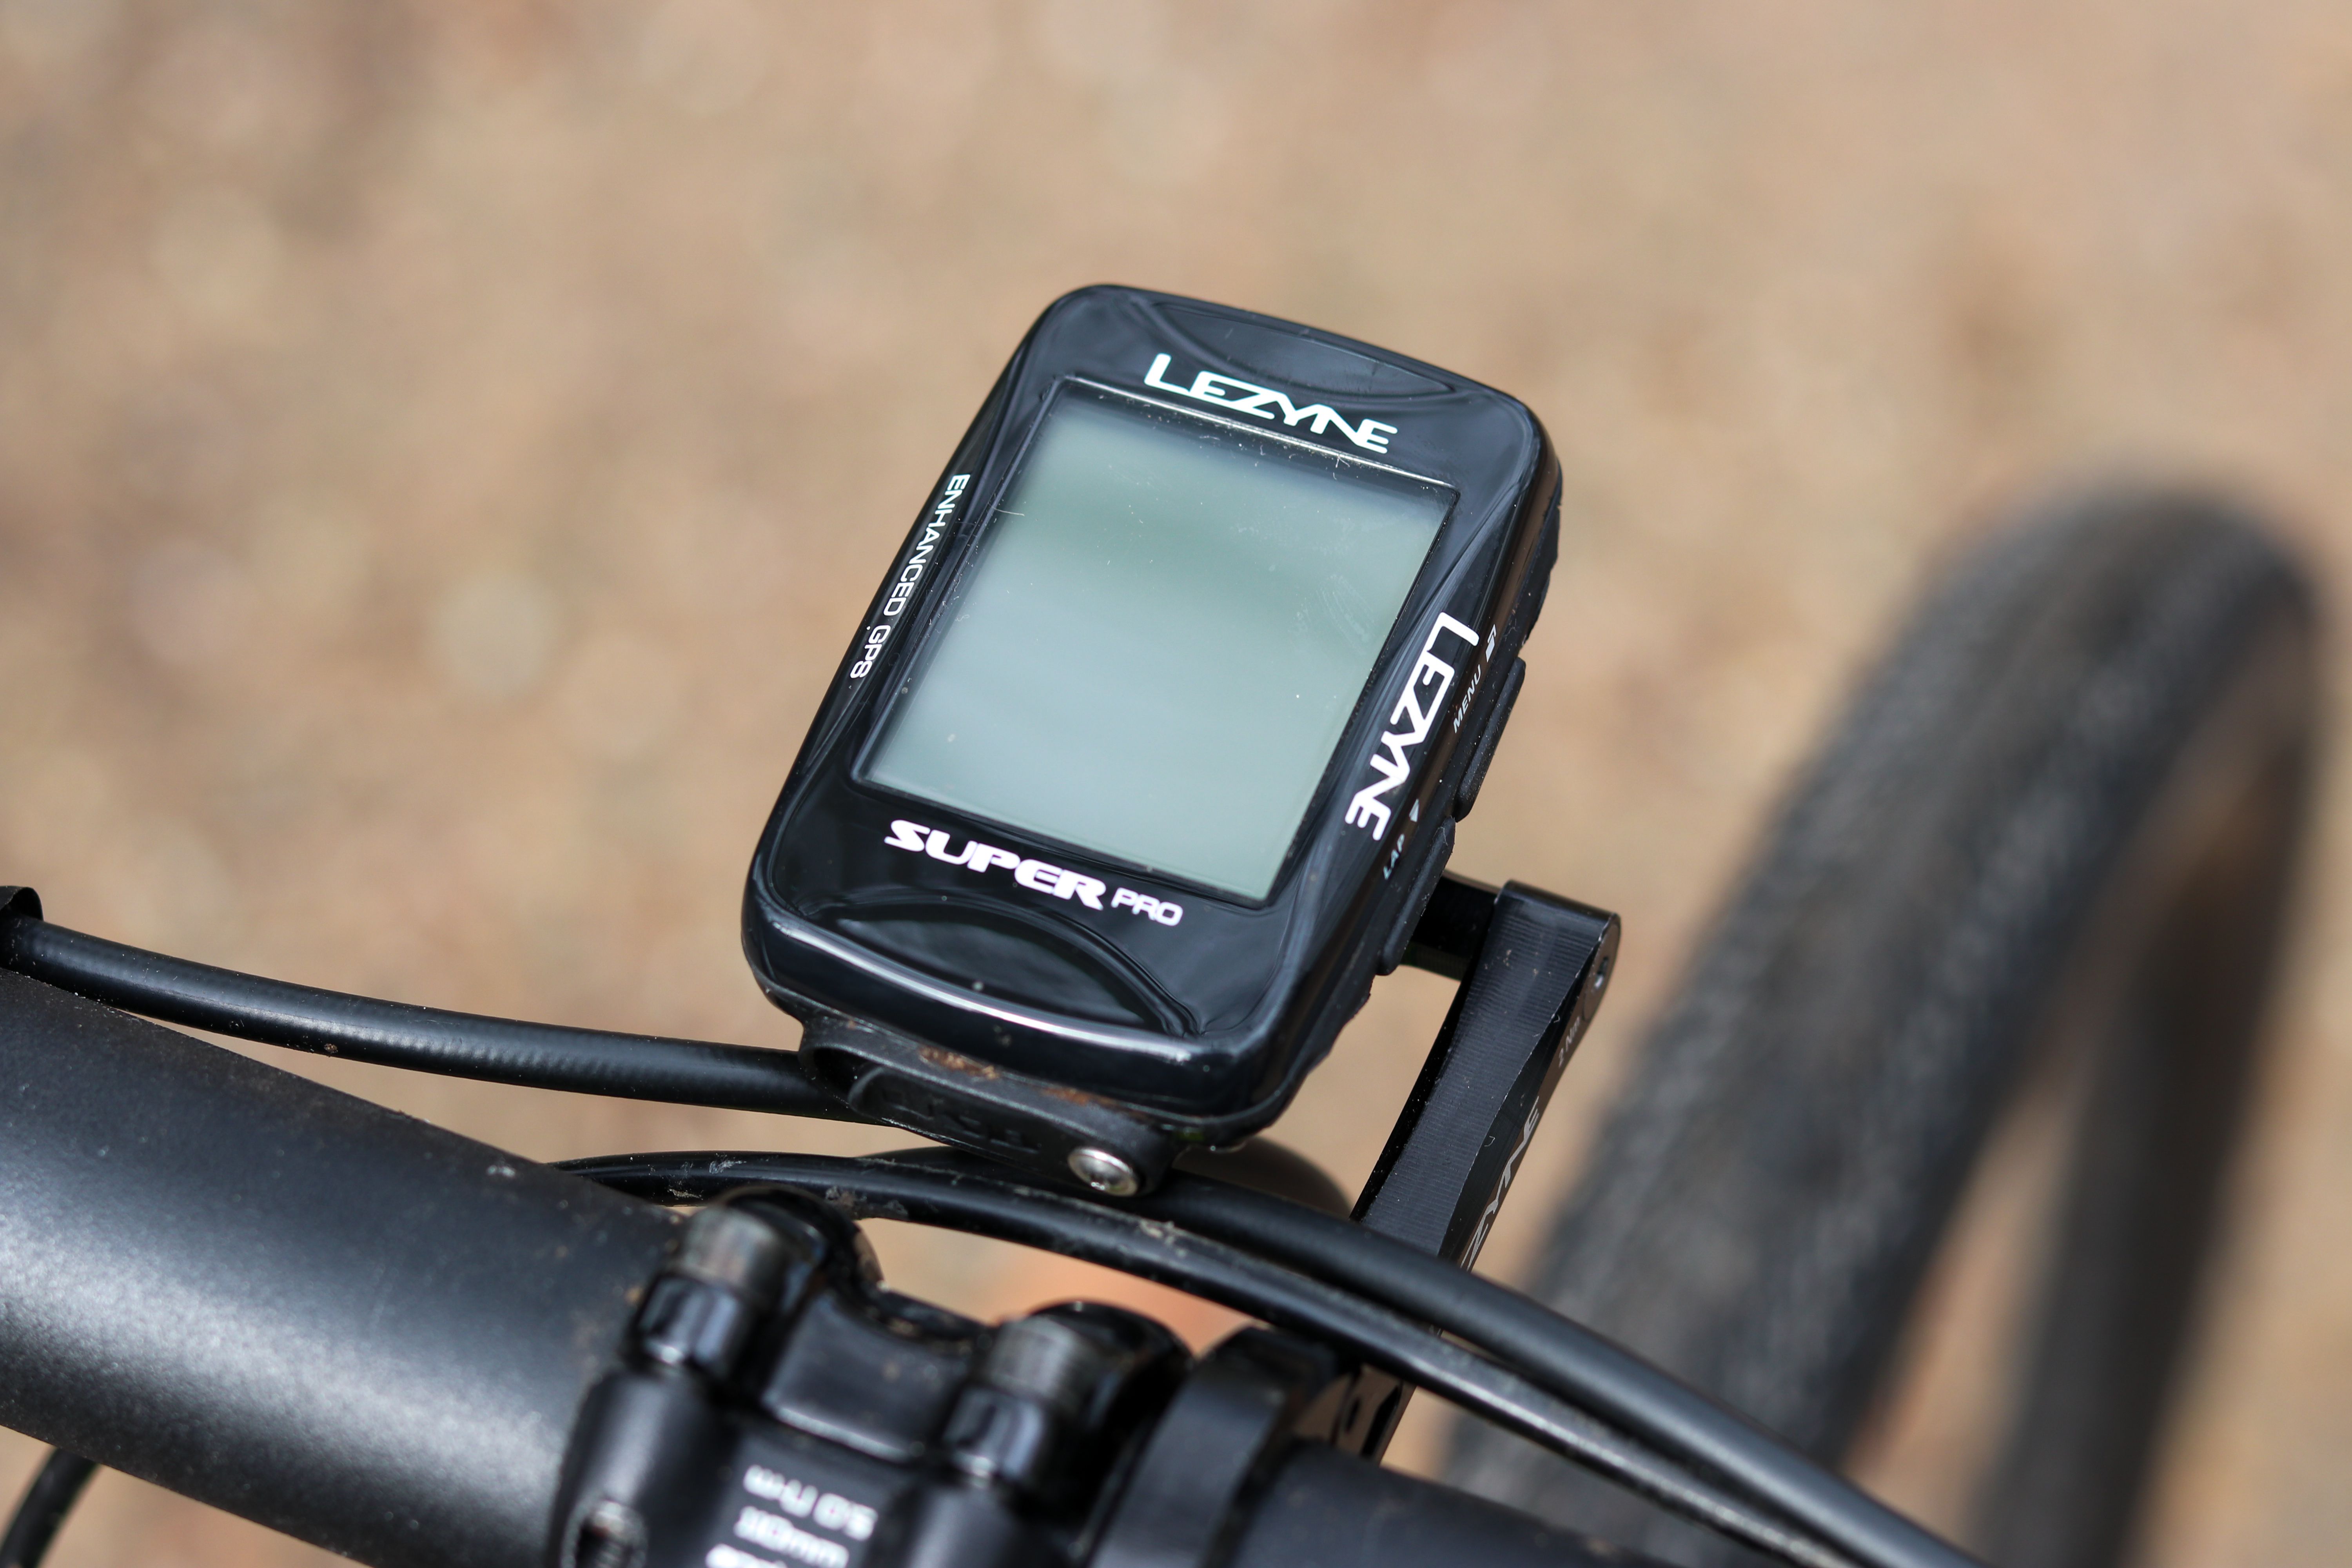 wang zweep pijp Review: Lezyne Super Pro GPS - Bicycling